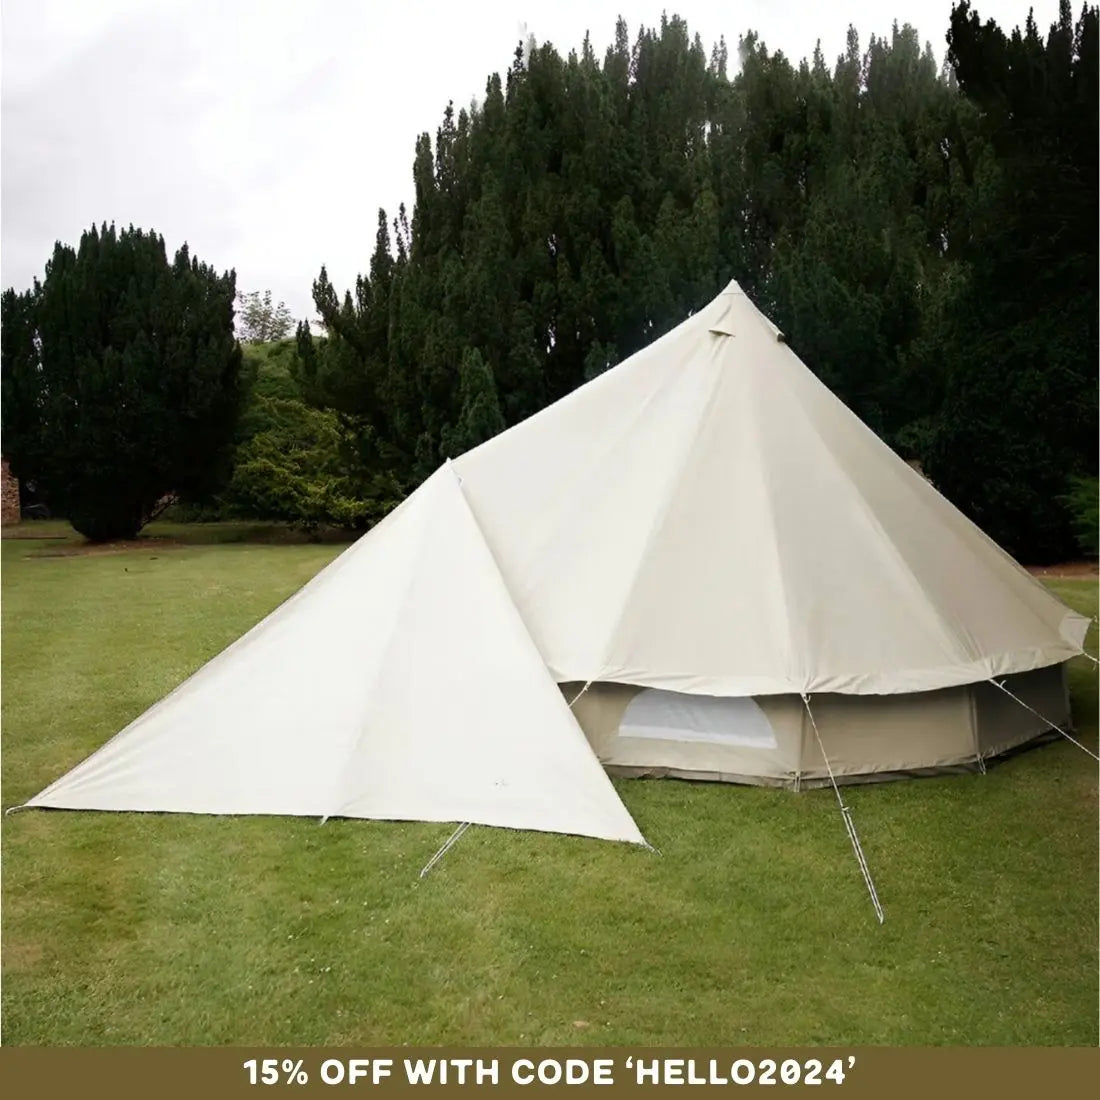 glamping bell tent canopy awning attachment boutique camping